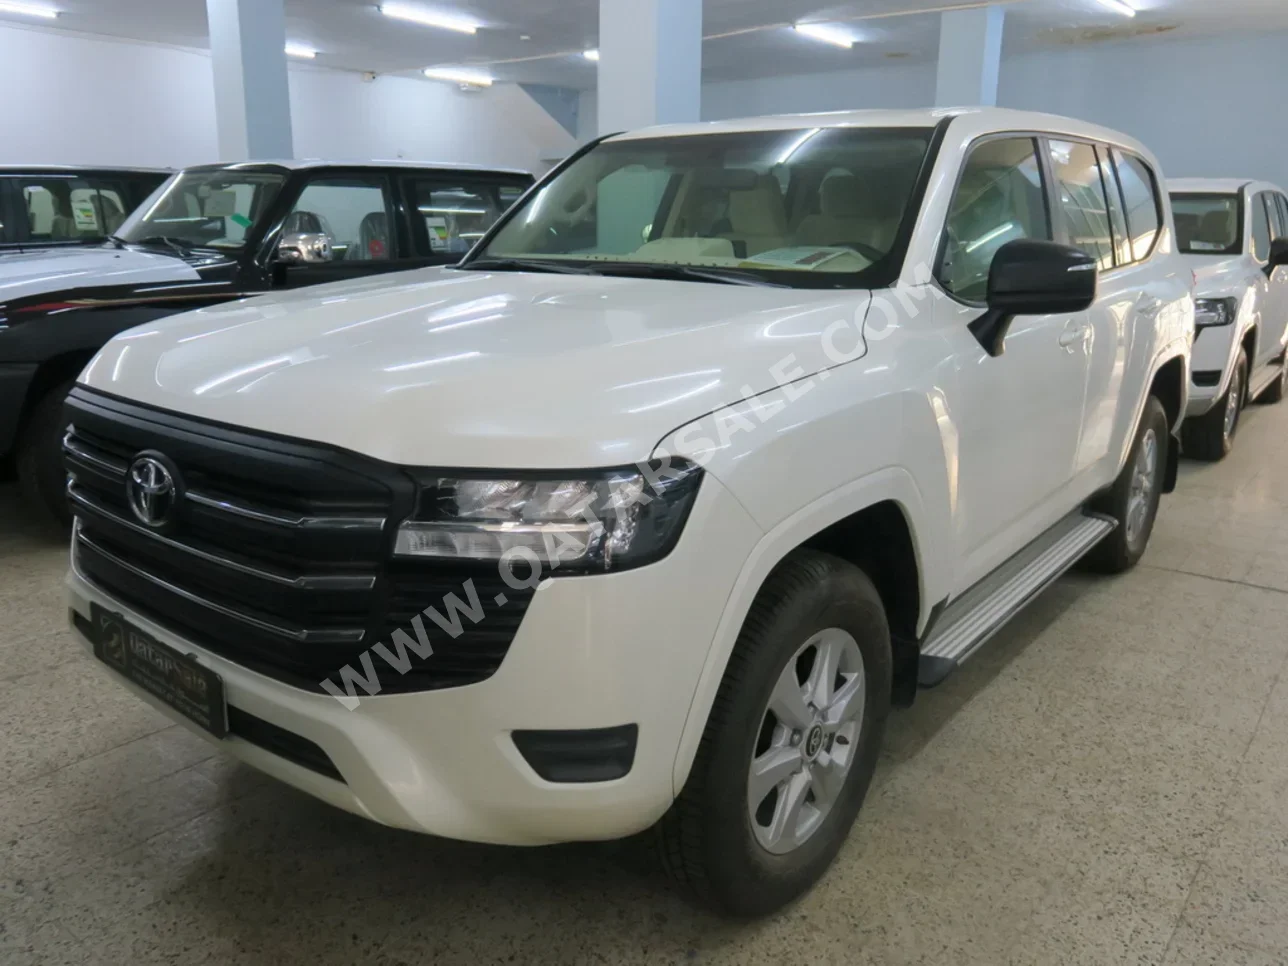 Toyota  Land Cruiser  GXR Twin Turbo  2022  Automatic  50,000 Km  6 Cylinder  Four Wheel Drive (4WD)  SUV  White